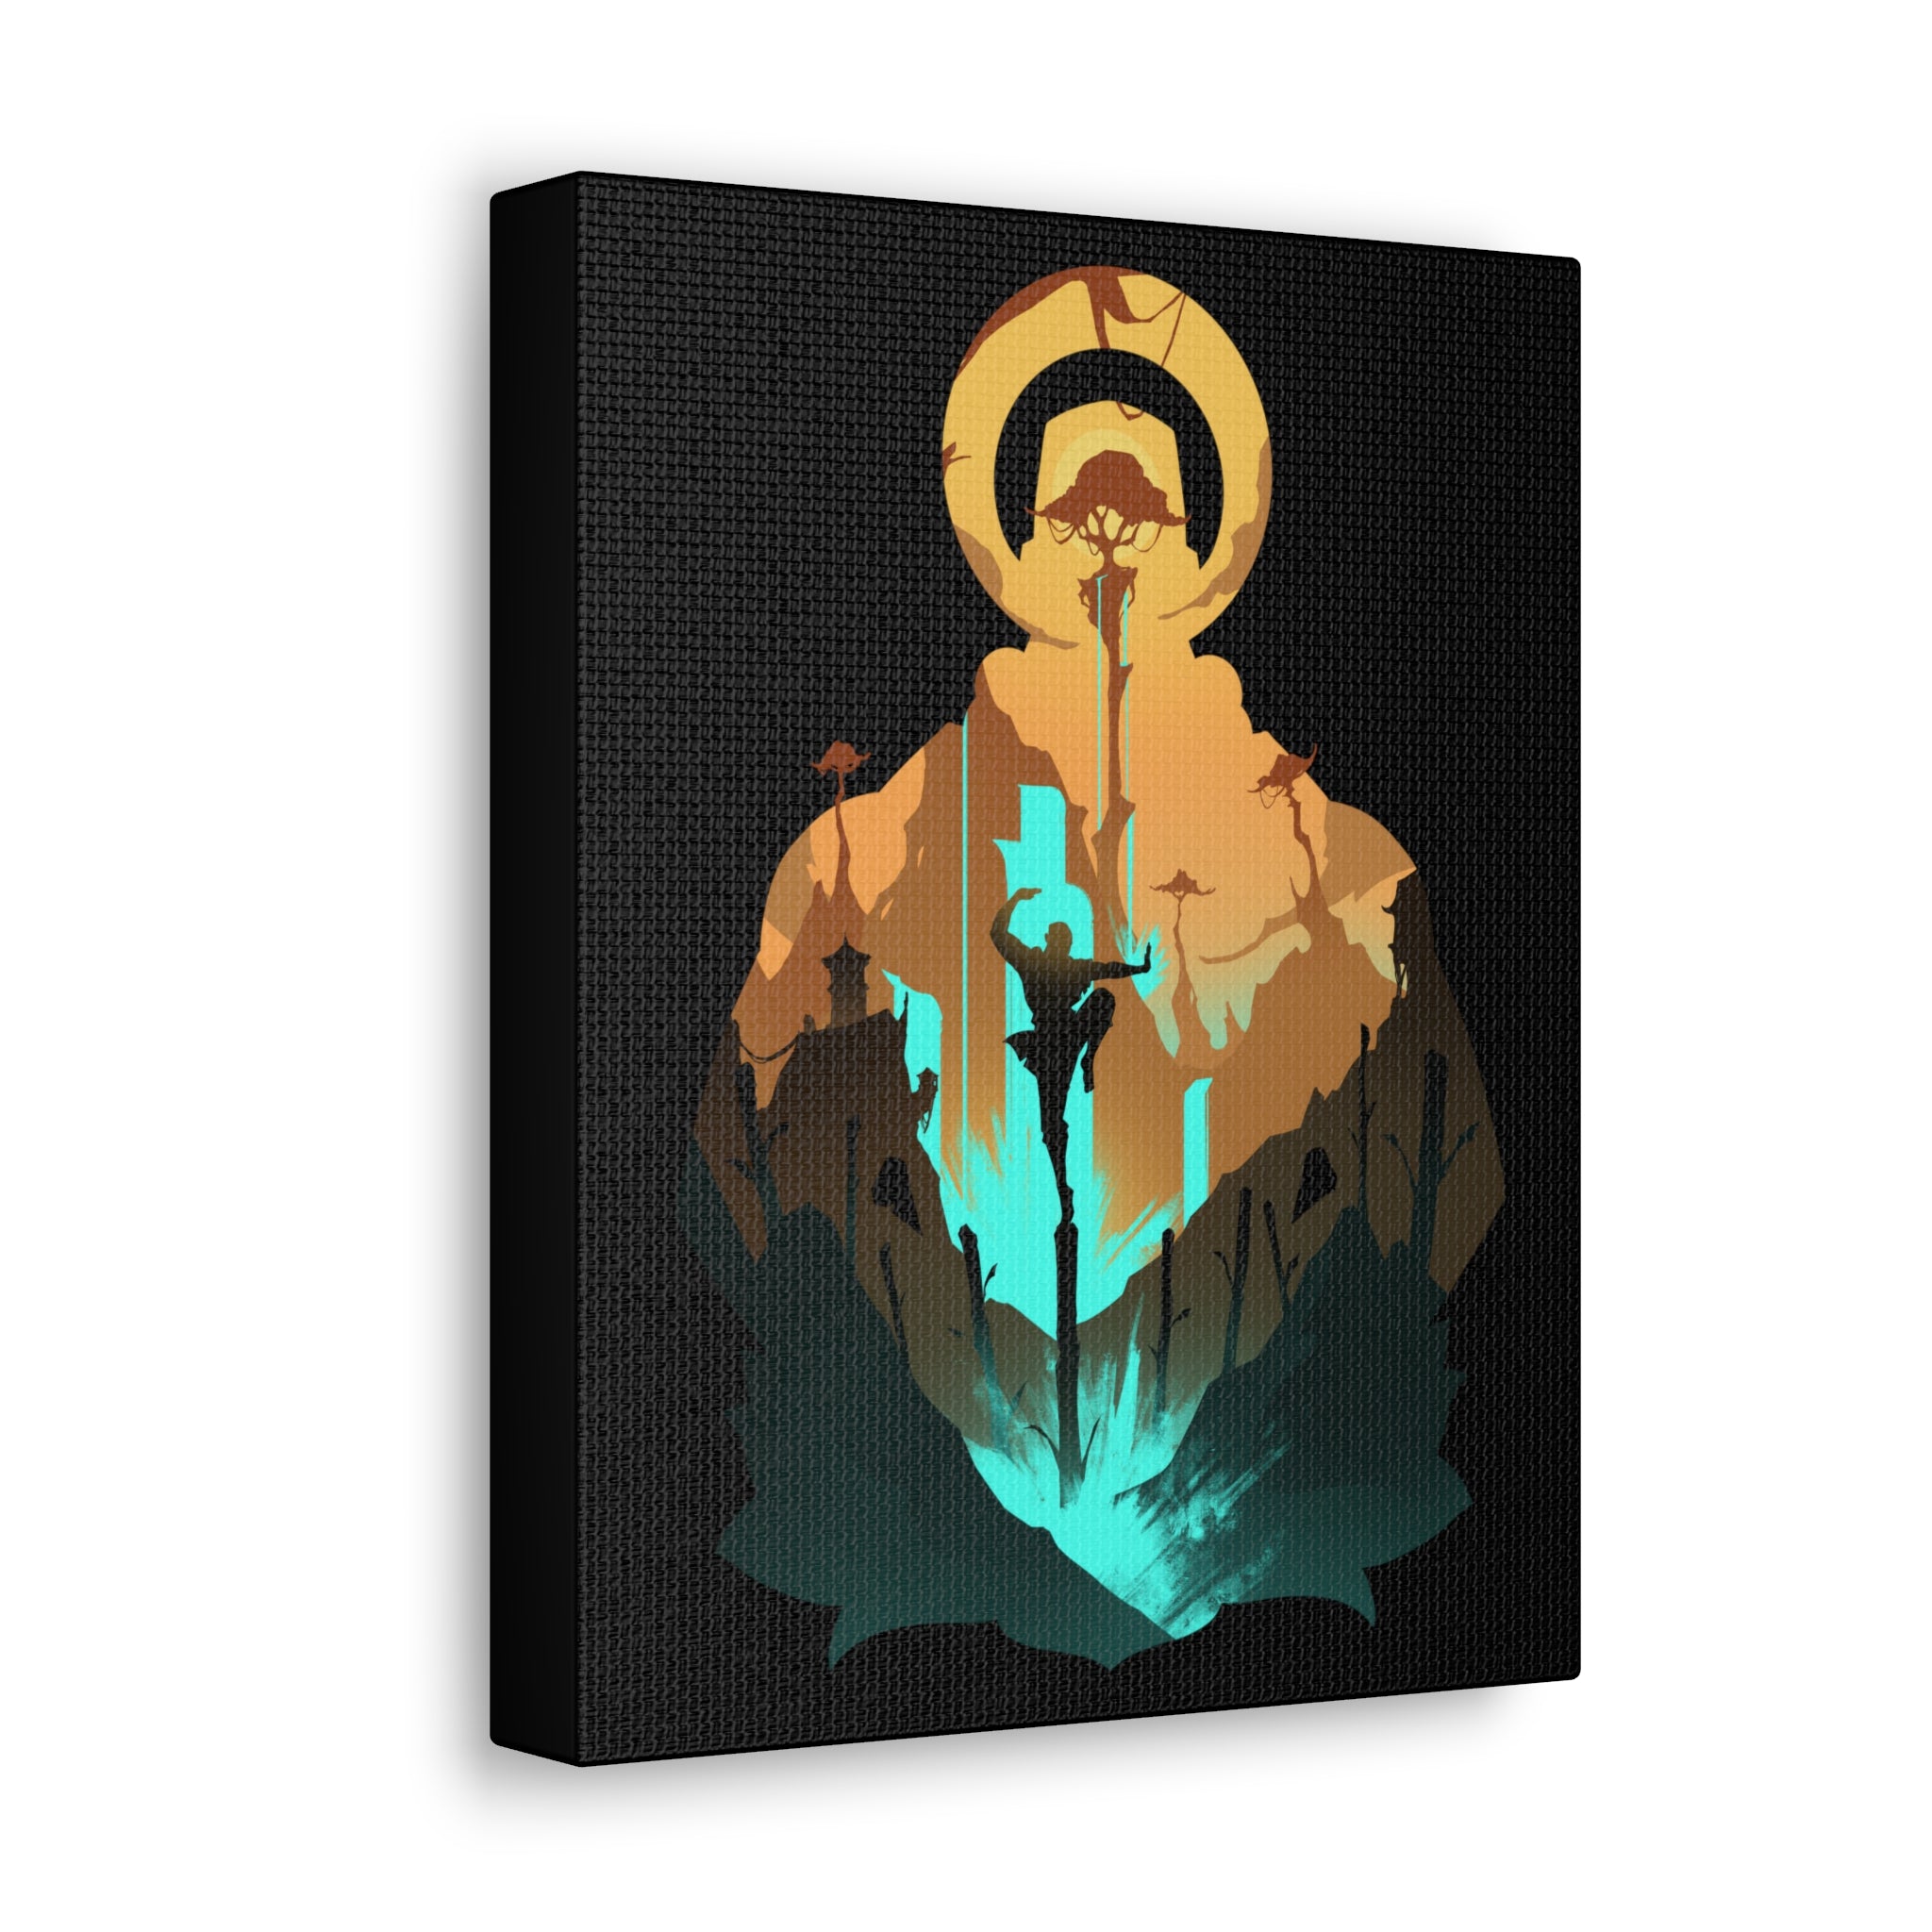 MONK CLASS SILHOUETTE CANVAS GALLERY WRAPS